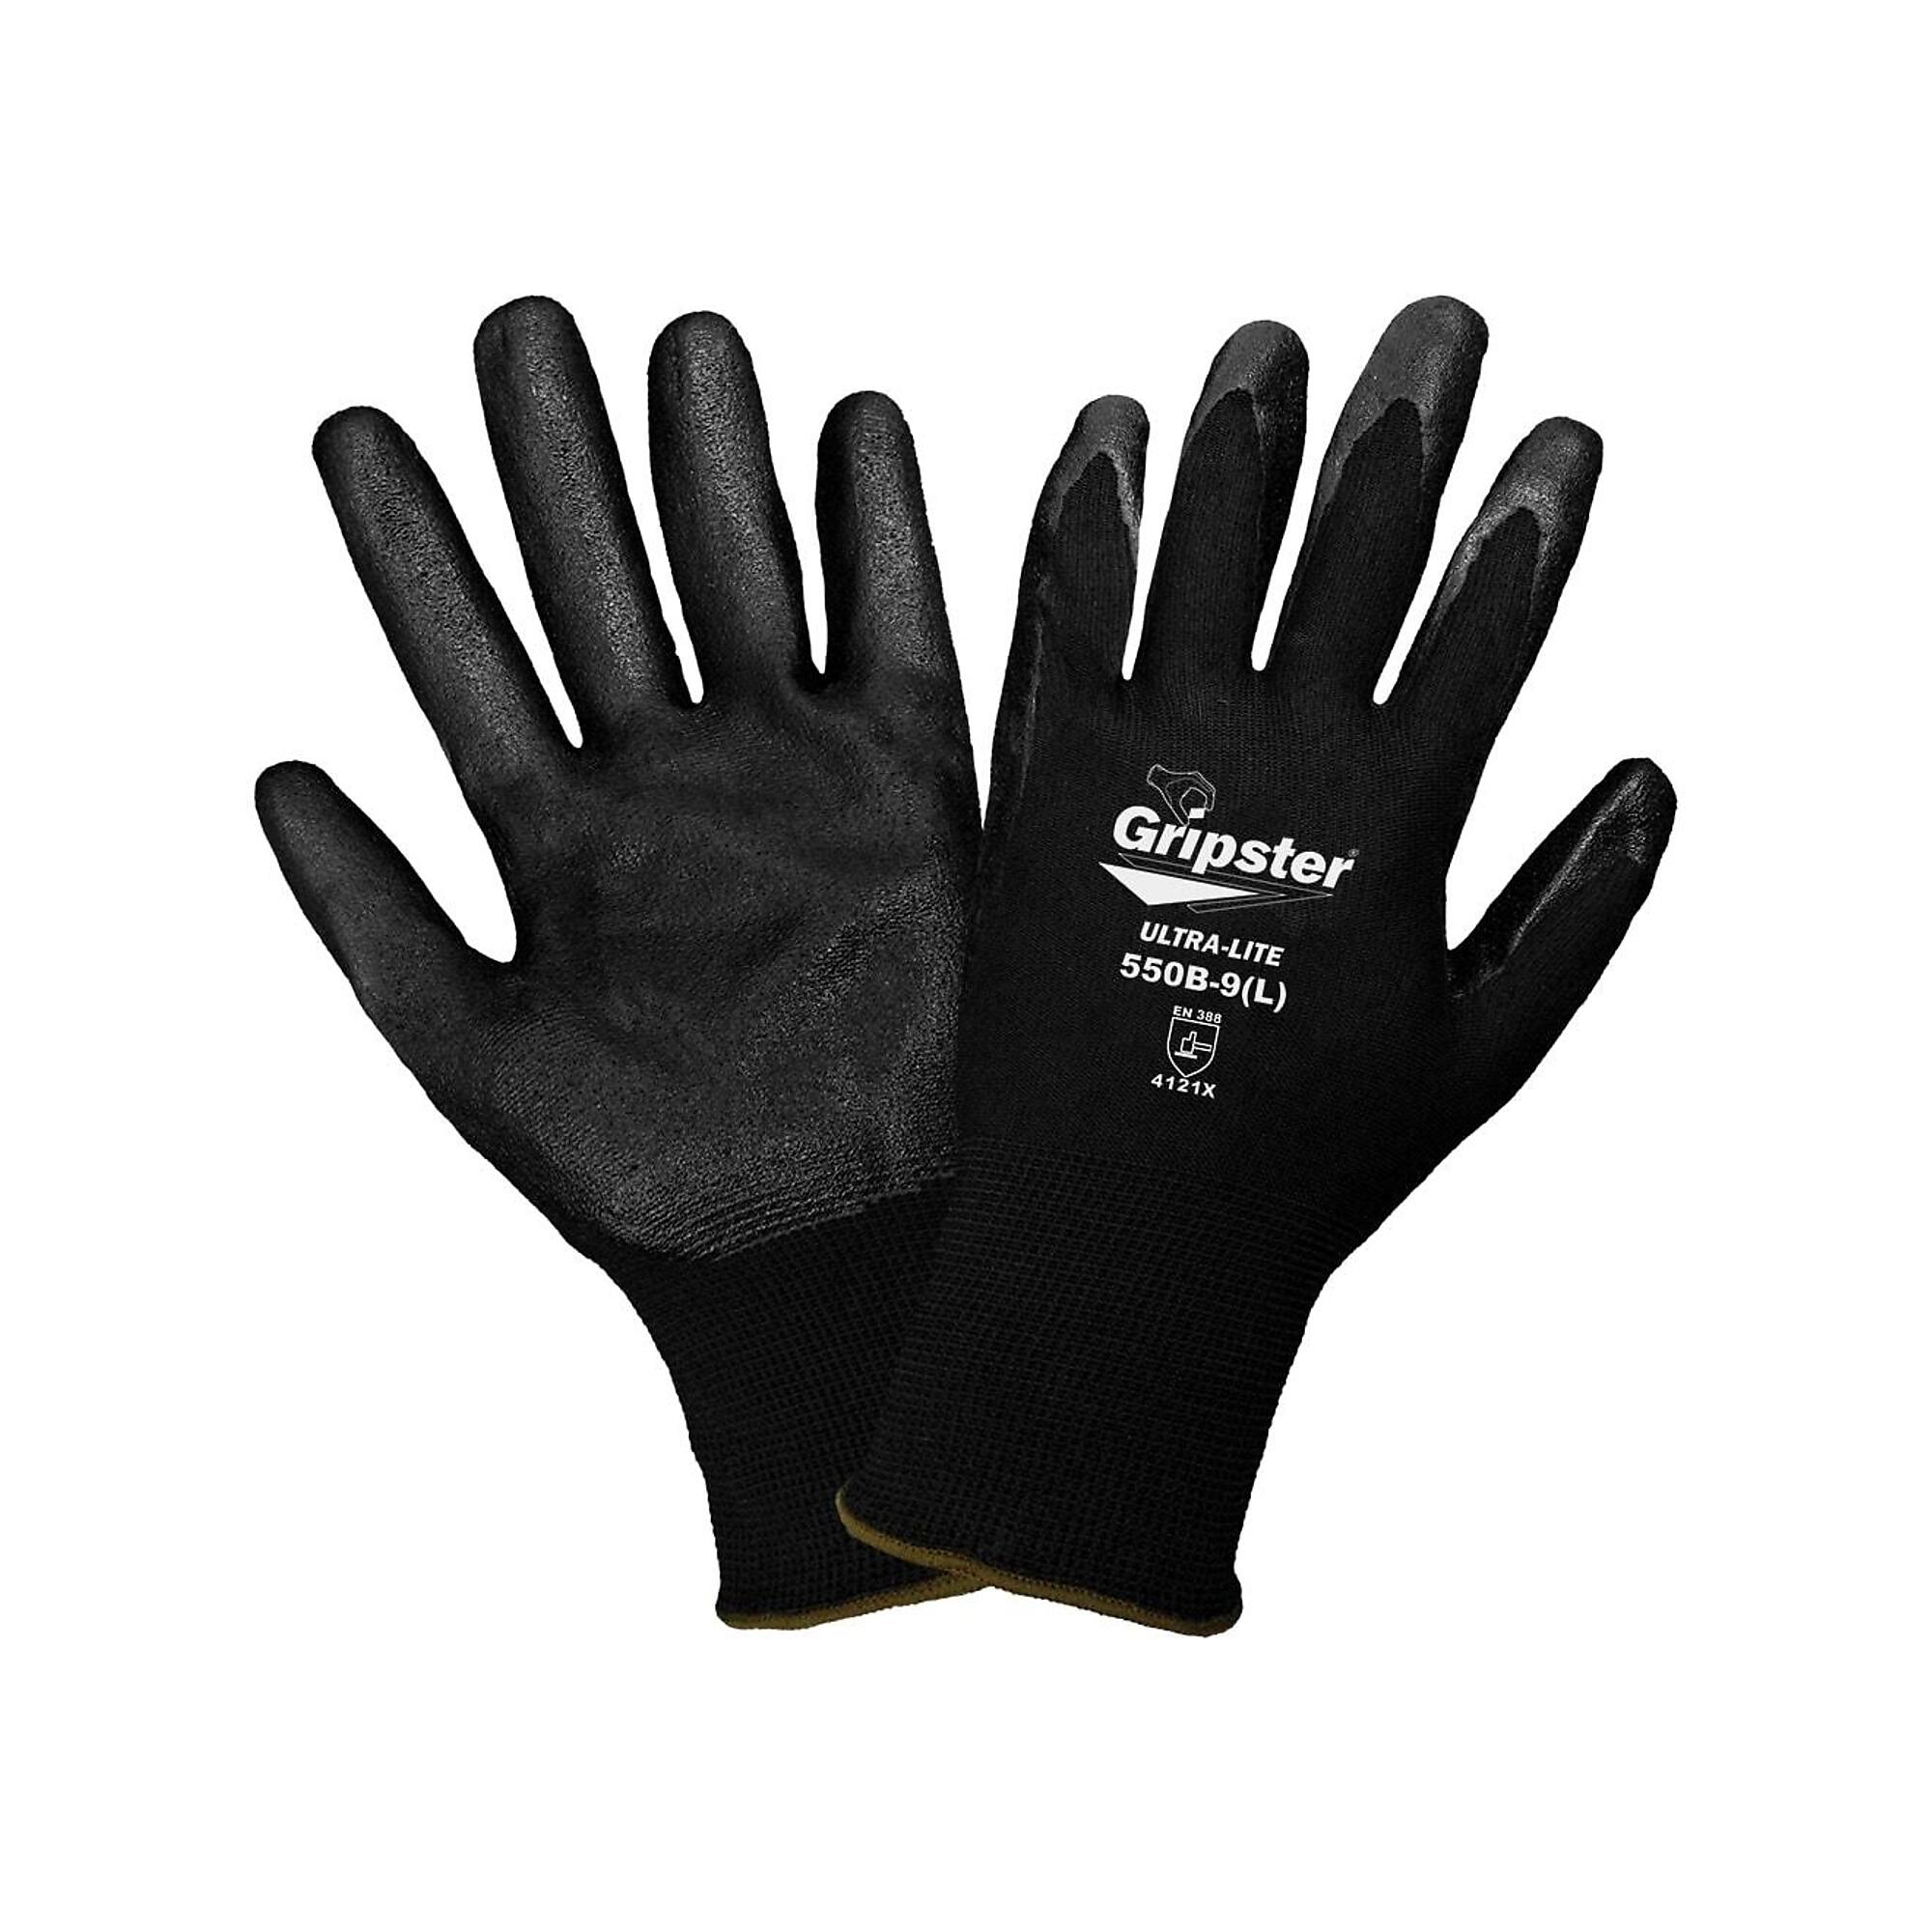 Global Glove Gripster , Black, Black Nitrile Dip, Cut Resistant A1 Gloves - 12 Pairs, Size XL, Color Black, Included (qty.) 12 Model 550B-10(XL)